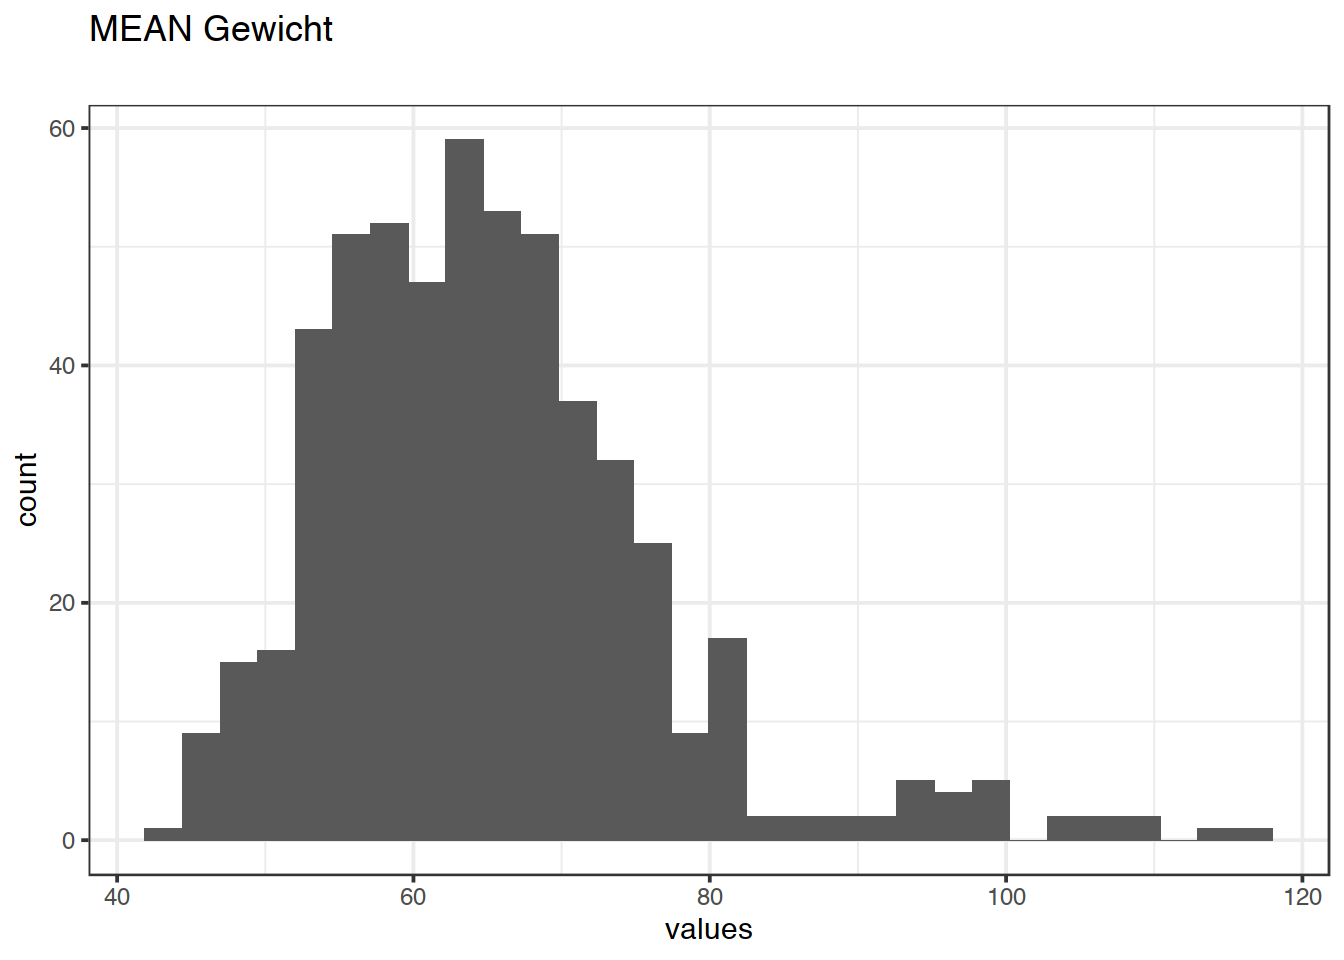 Distribution of values for MEAN Gewicht